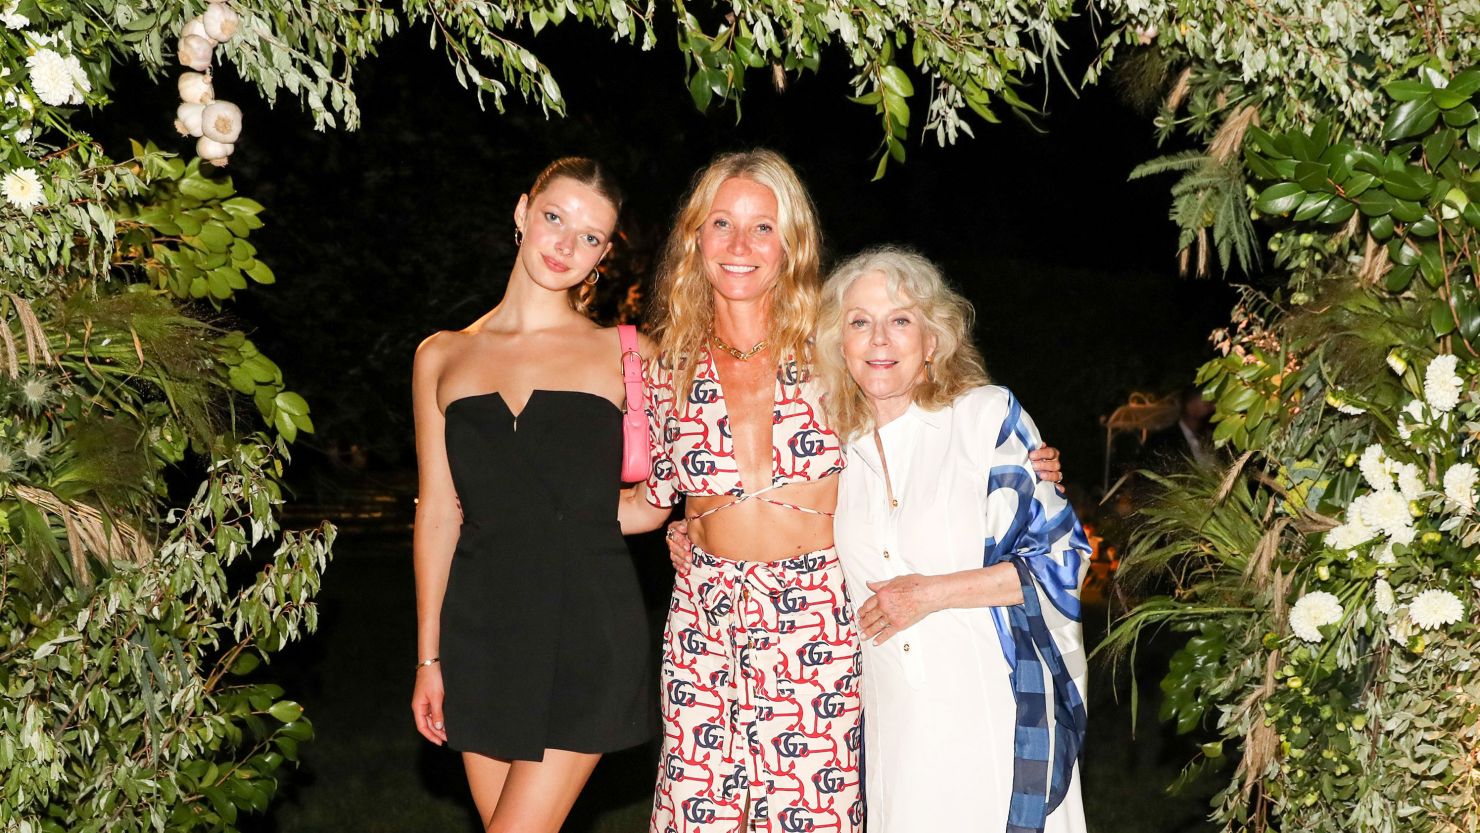 Paltrow poses with lookalike daughter Apple Martin at Goop